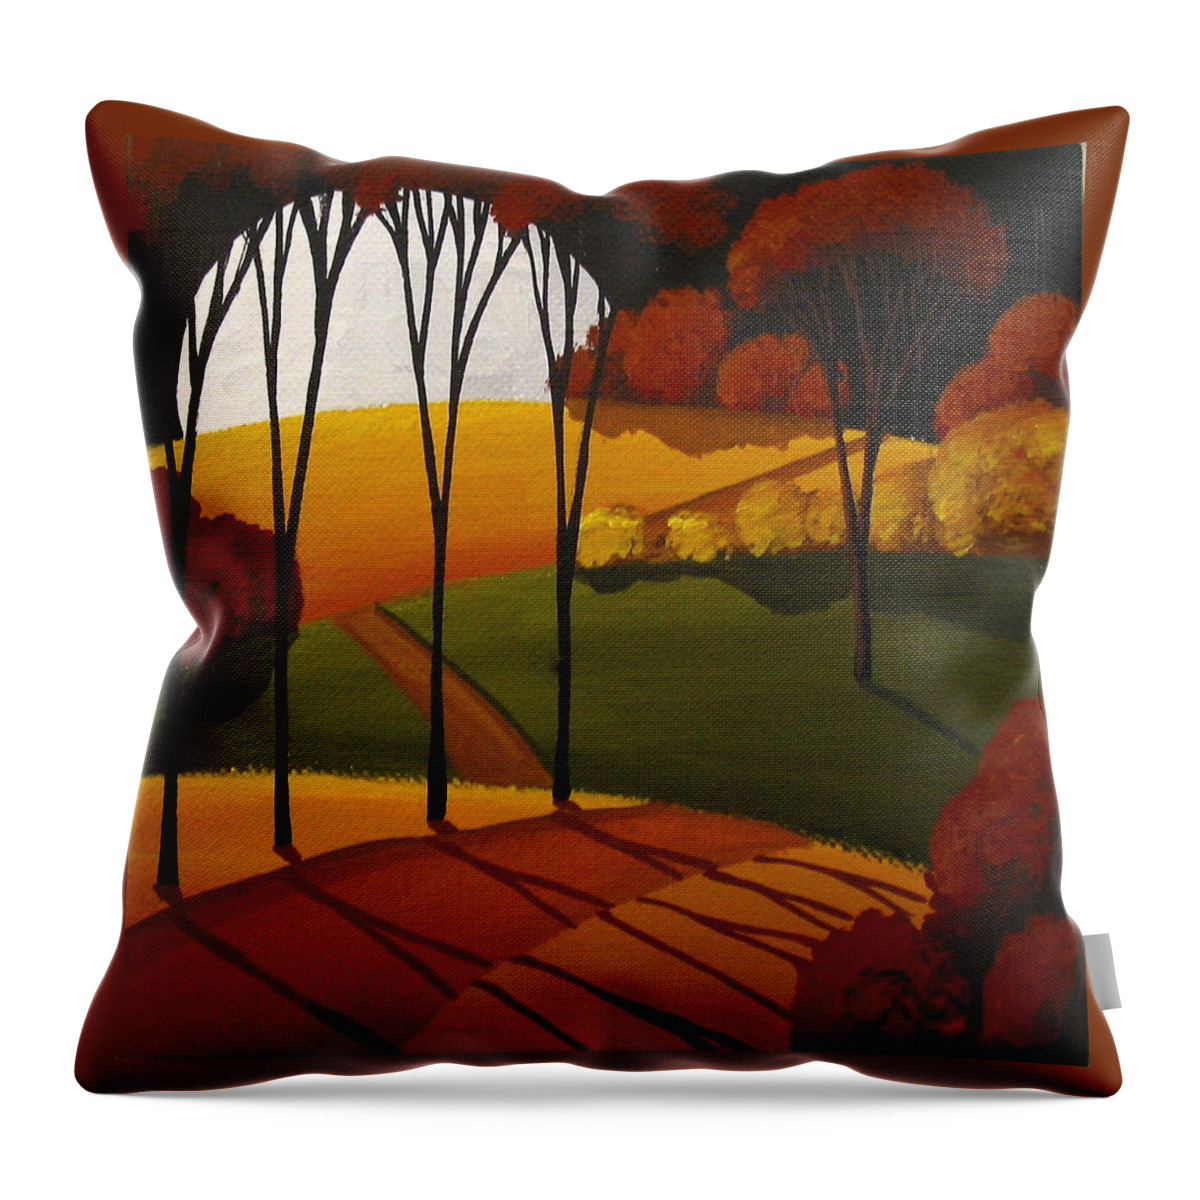 Art Throw Pillow featuring the painting Road Of Autumn by Debbie Criswell